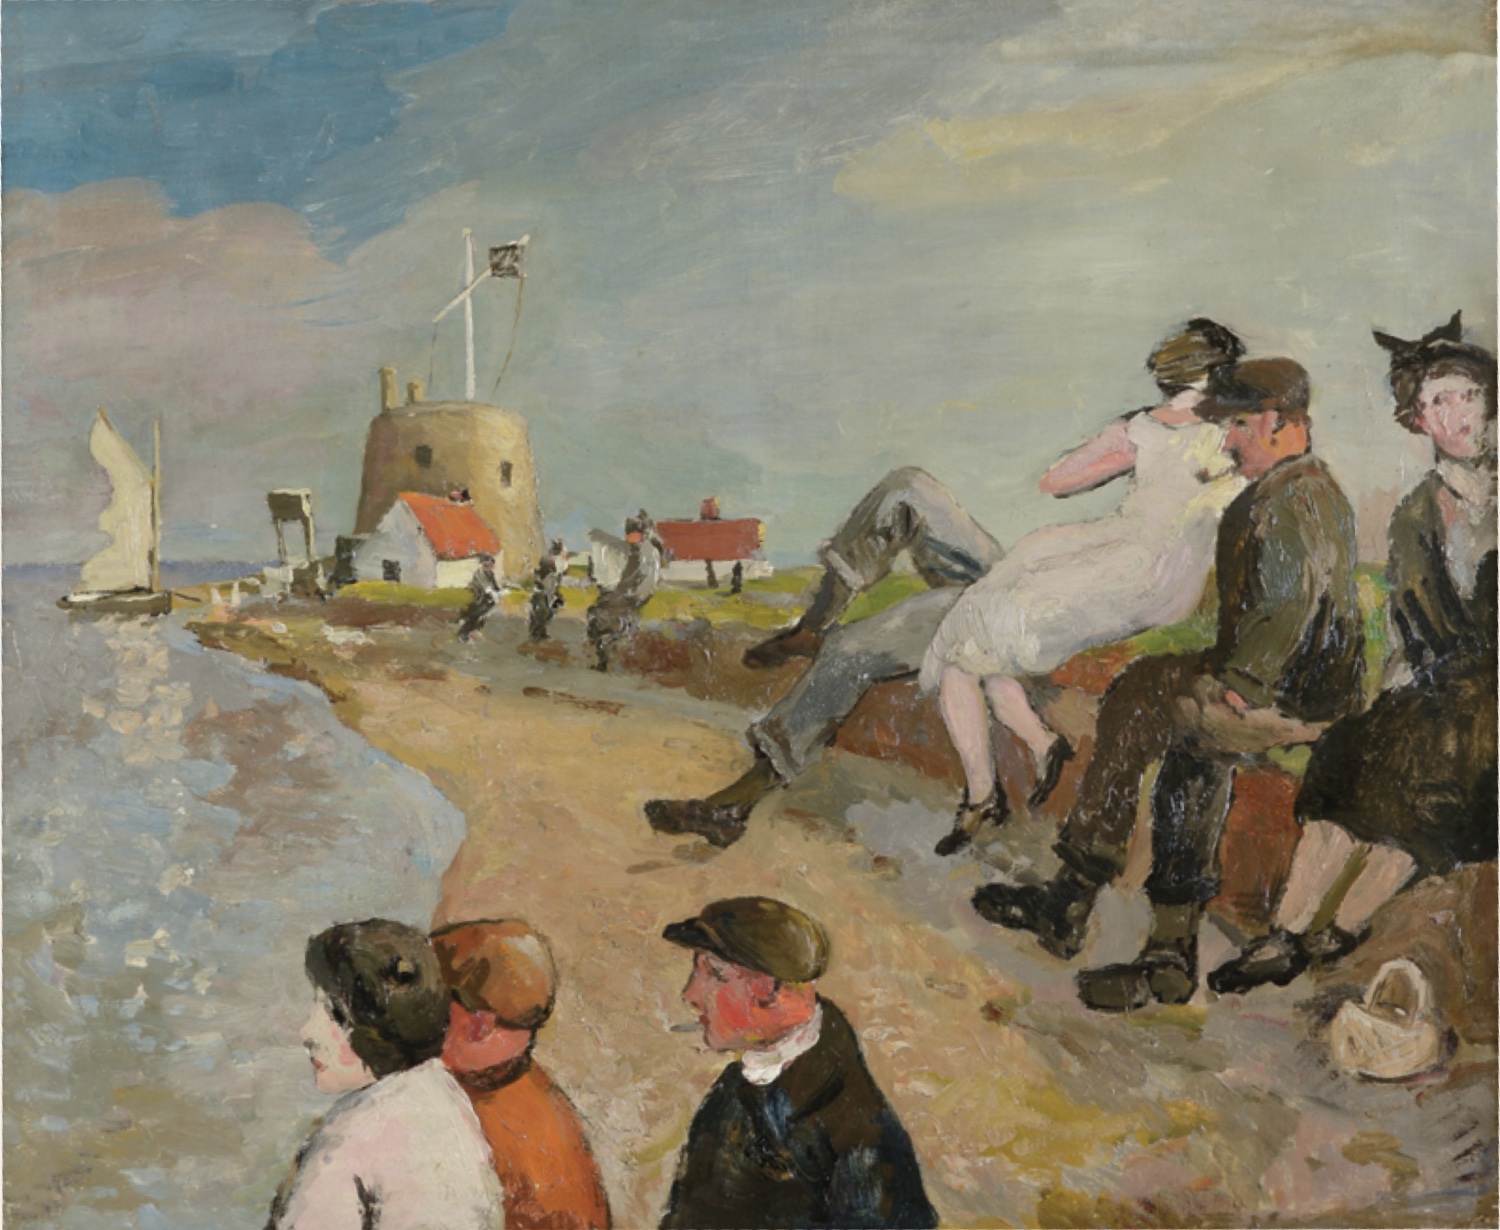 Allan Walton (1892-1948) Bawdsey End, Old Felixstowe, Suffolk; oil on canvas, sold for £7,150 more than triple its low estimate of £2,000 at the same sale, image courtesy of Sworders